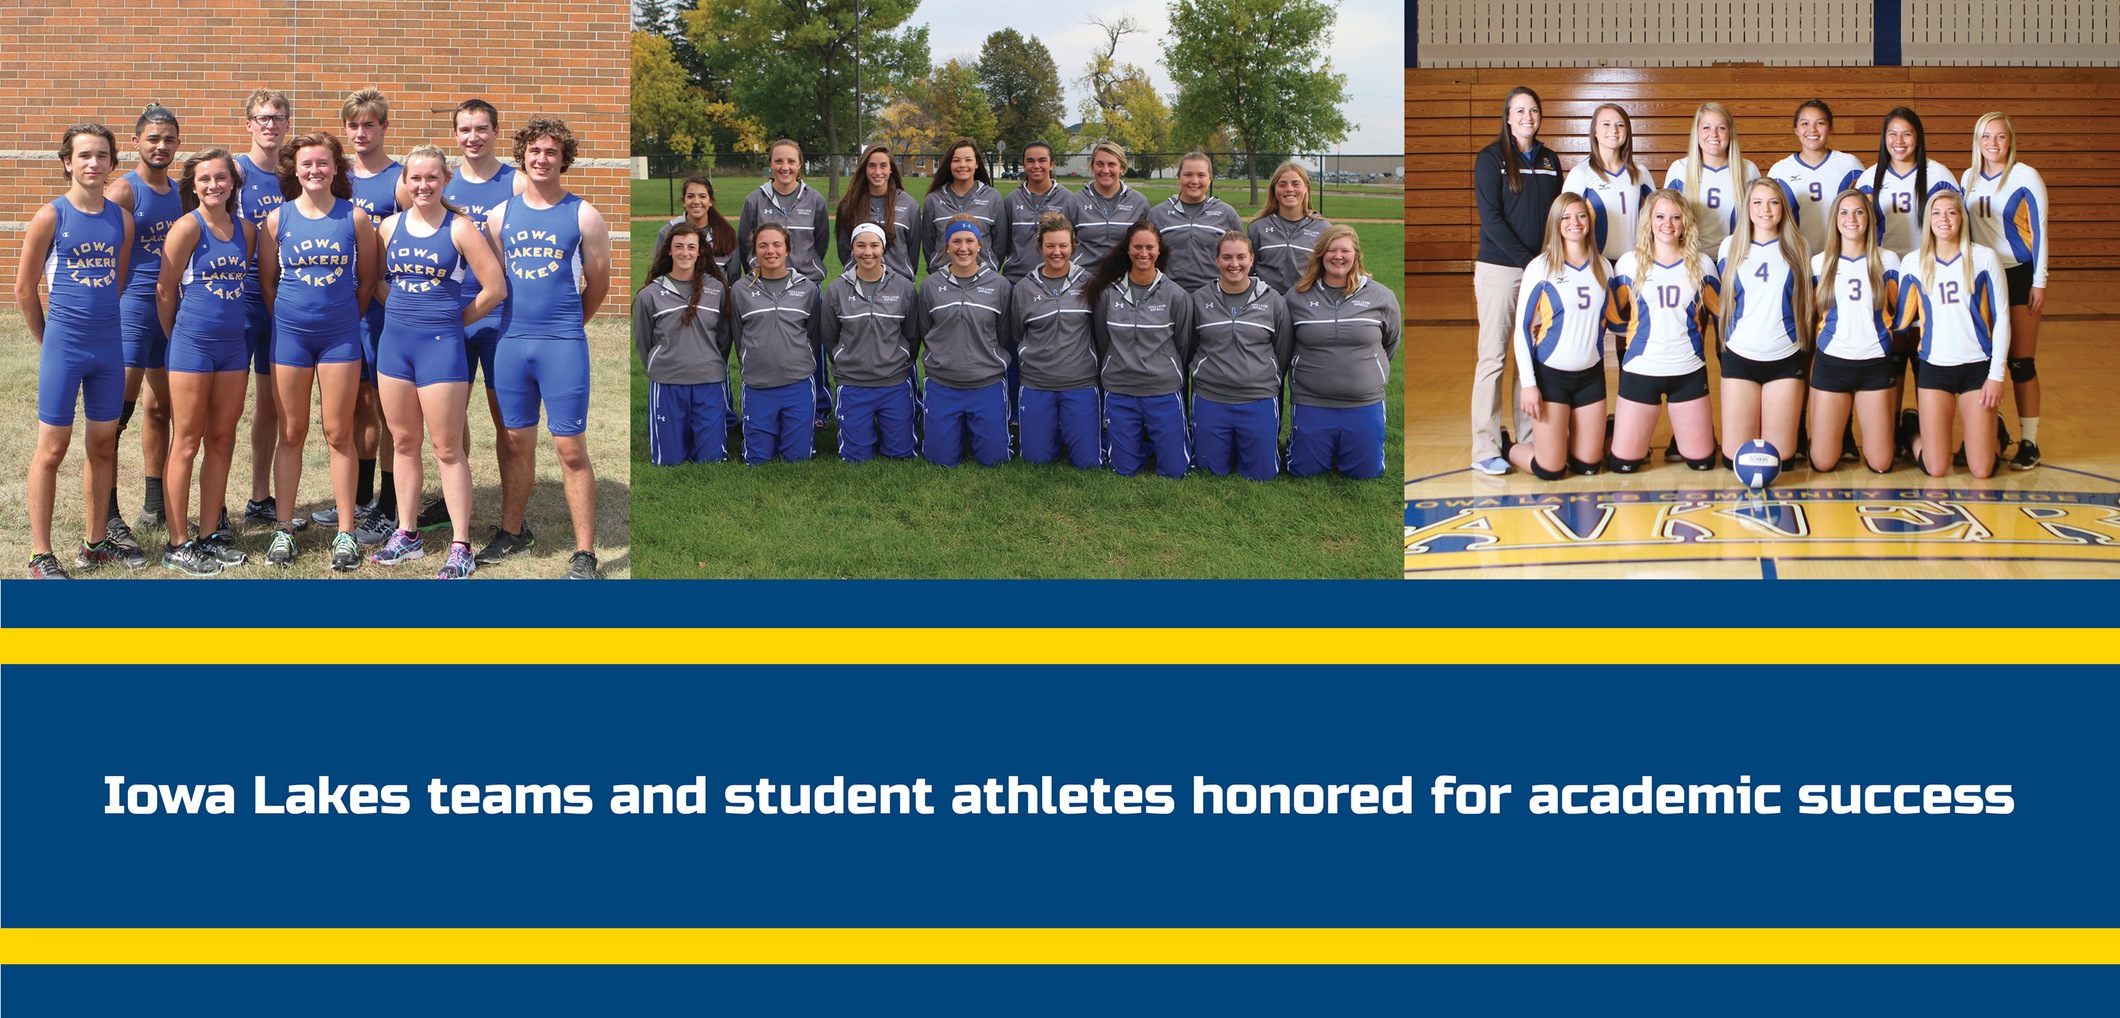 Iowa Lakes teams and student athletes honored for academic success